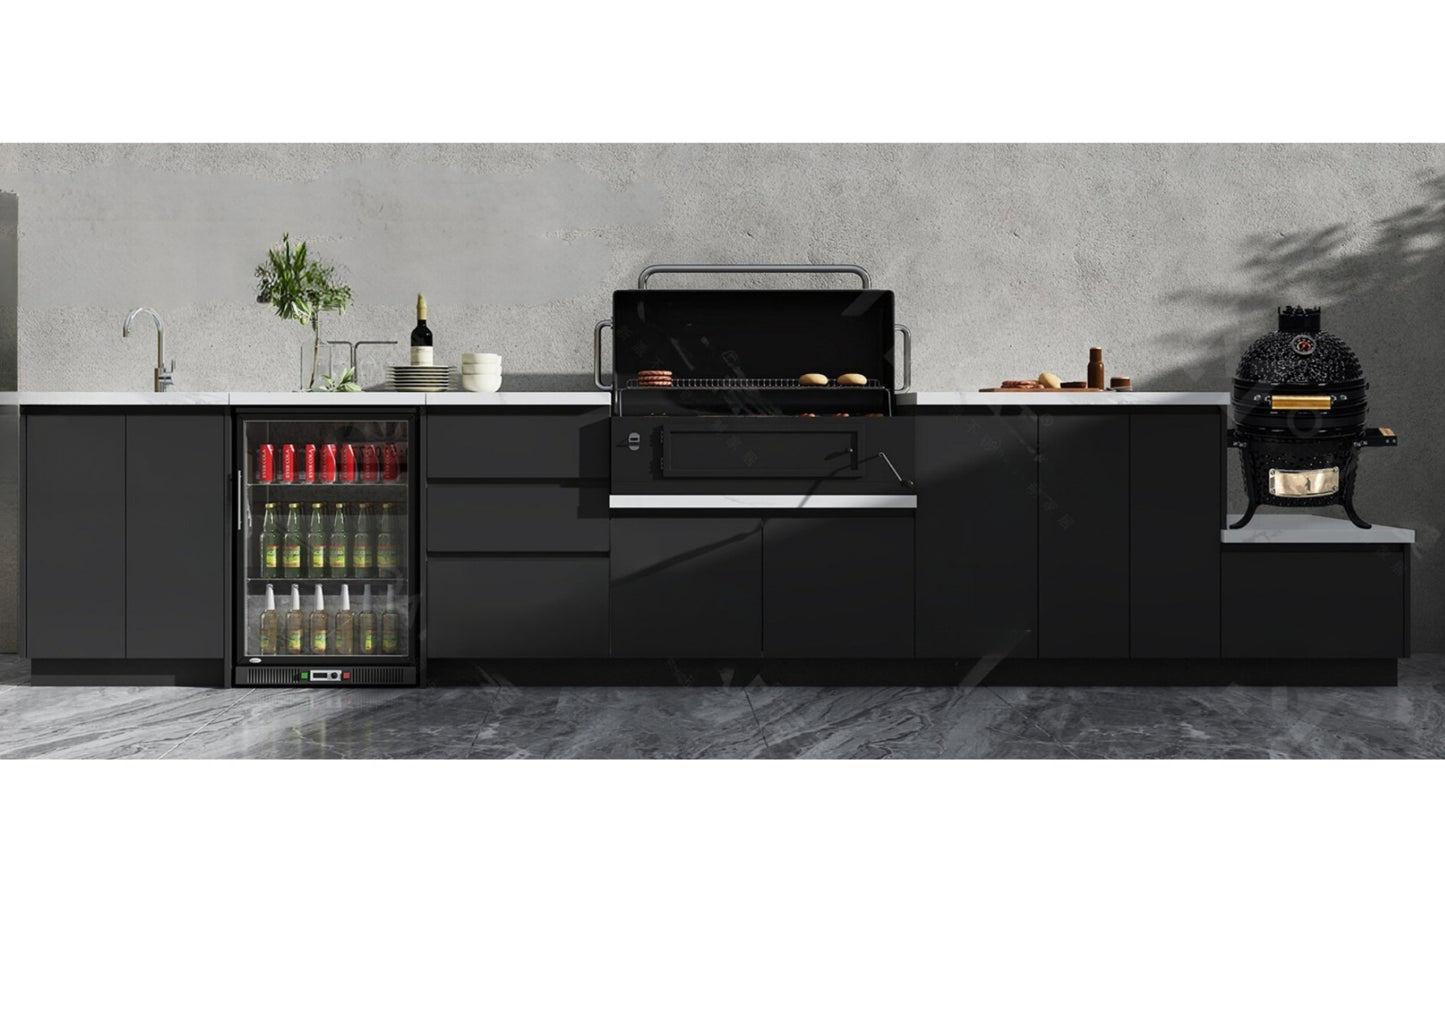 164 inch Black Charcoal Sunzout Designer Series Modular Outdoor Kitchen, 34 in 4 Burner Grill, Sink - Sunzout Outdoor Spaces LLC